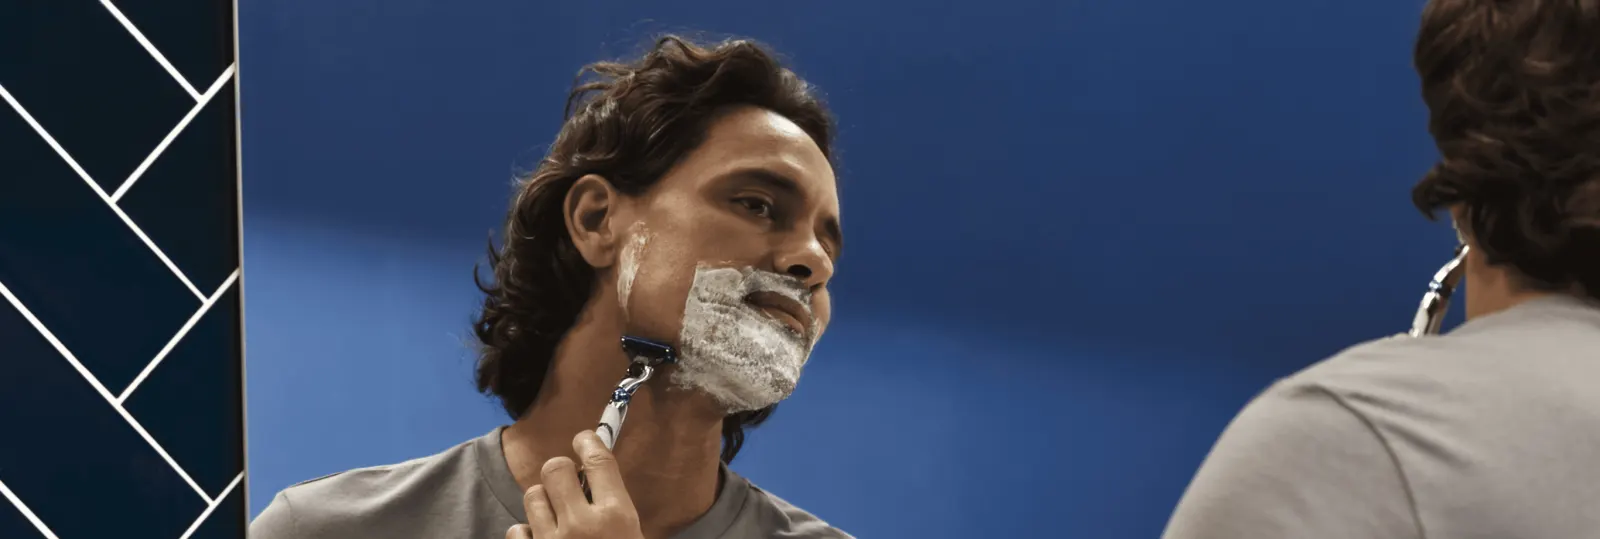 Tips for Shaving to Avoid Nicks and Cuts